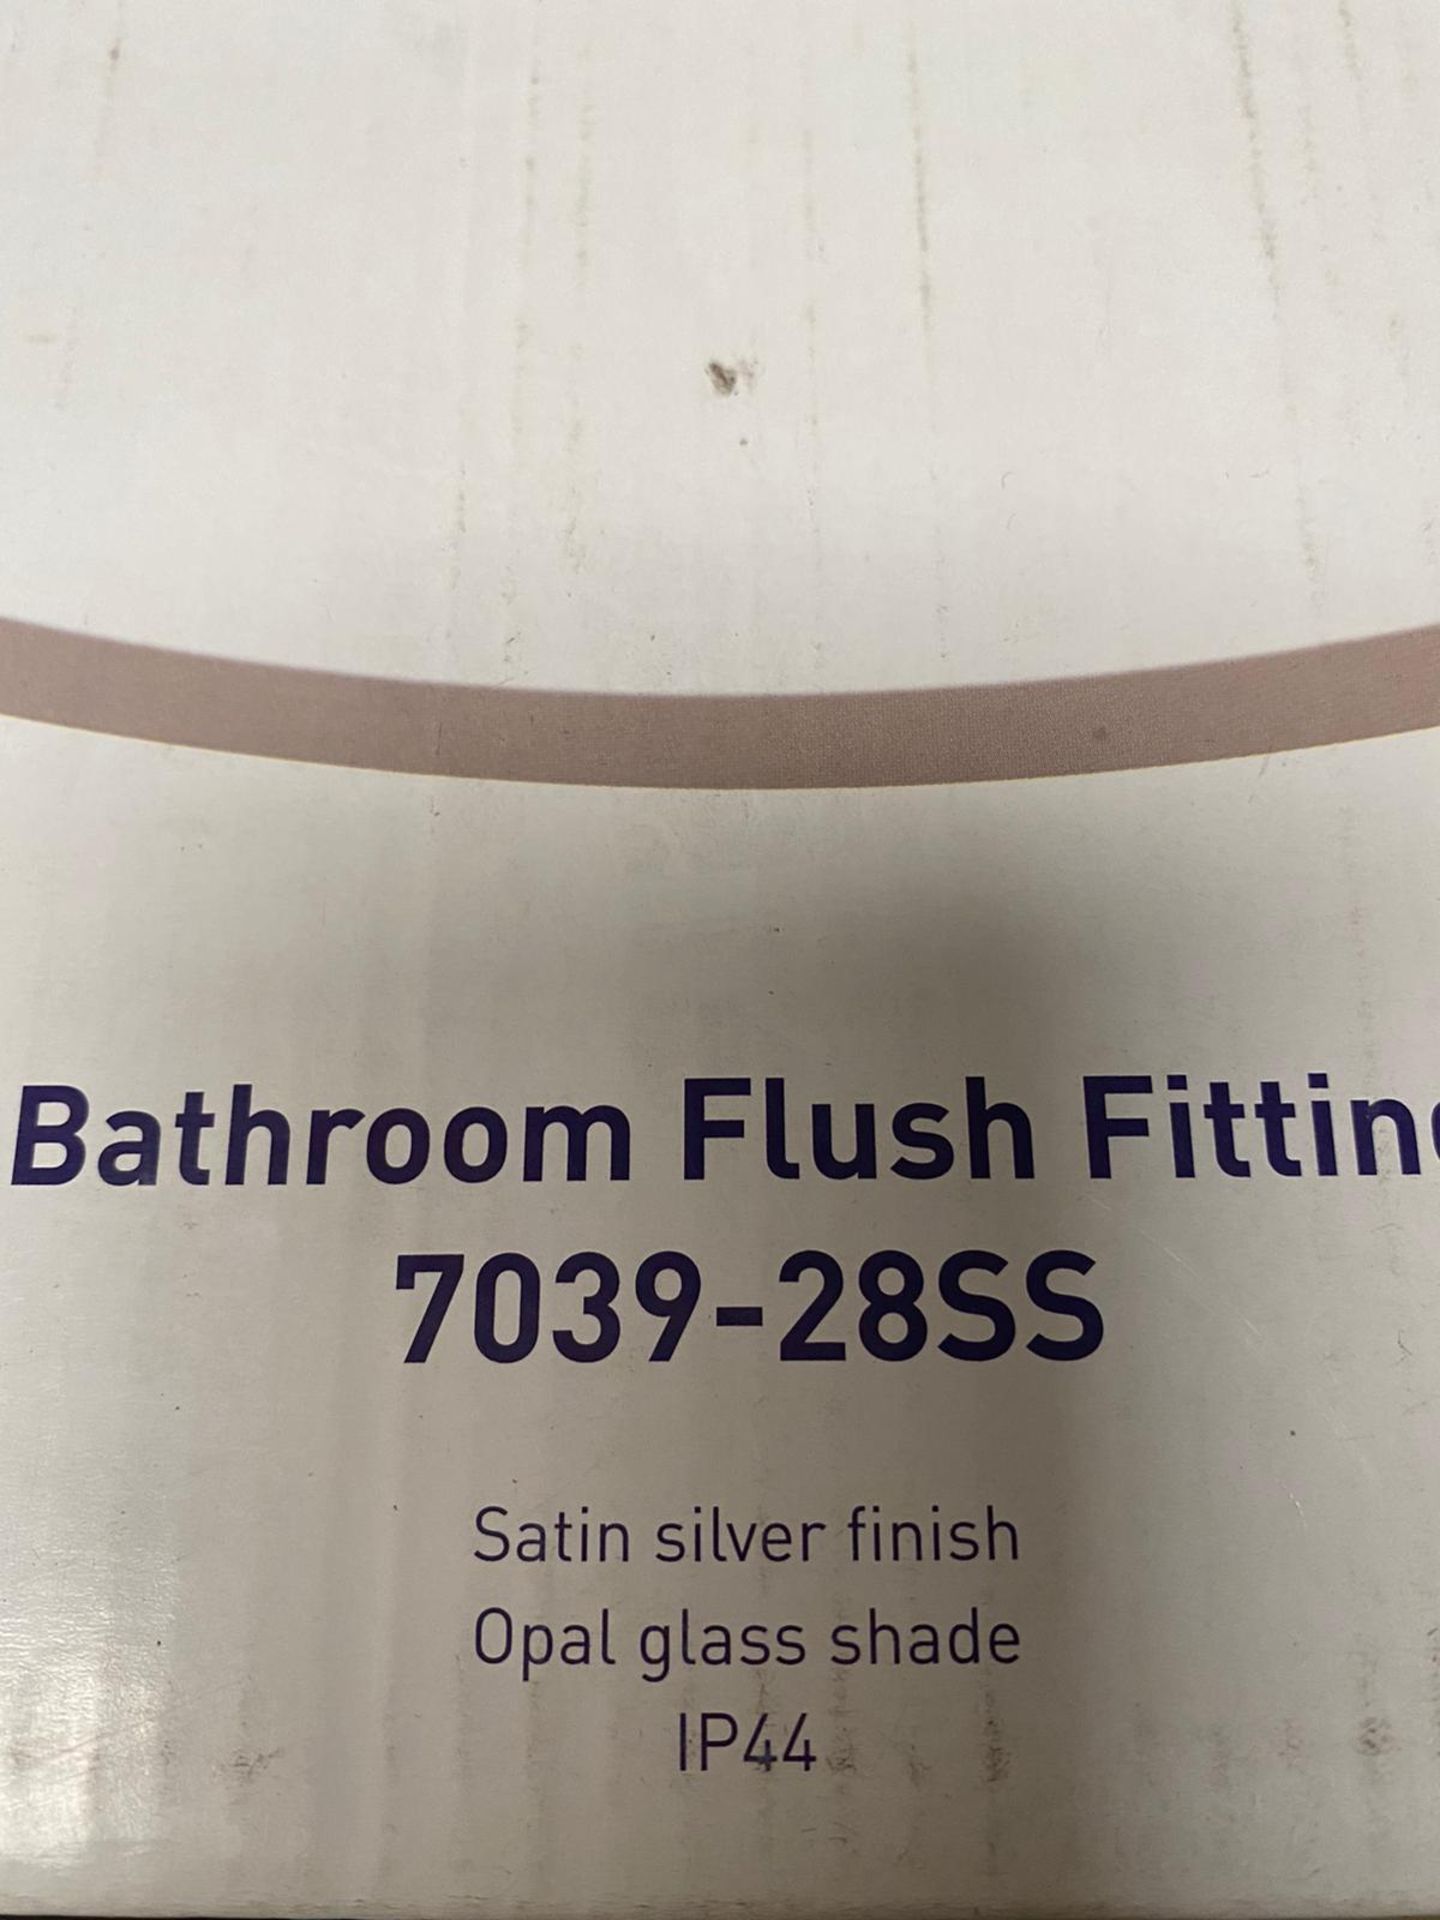 1 x Bathroom Flush fitting in a satin silver finish - Ref: 7039-28SS - New boxed - RRP: £60 (each) - Image 2 of 4